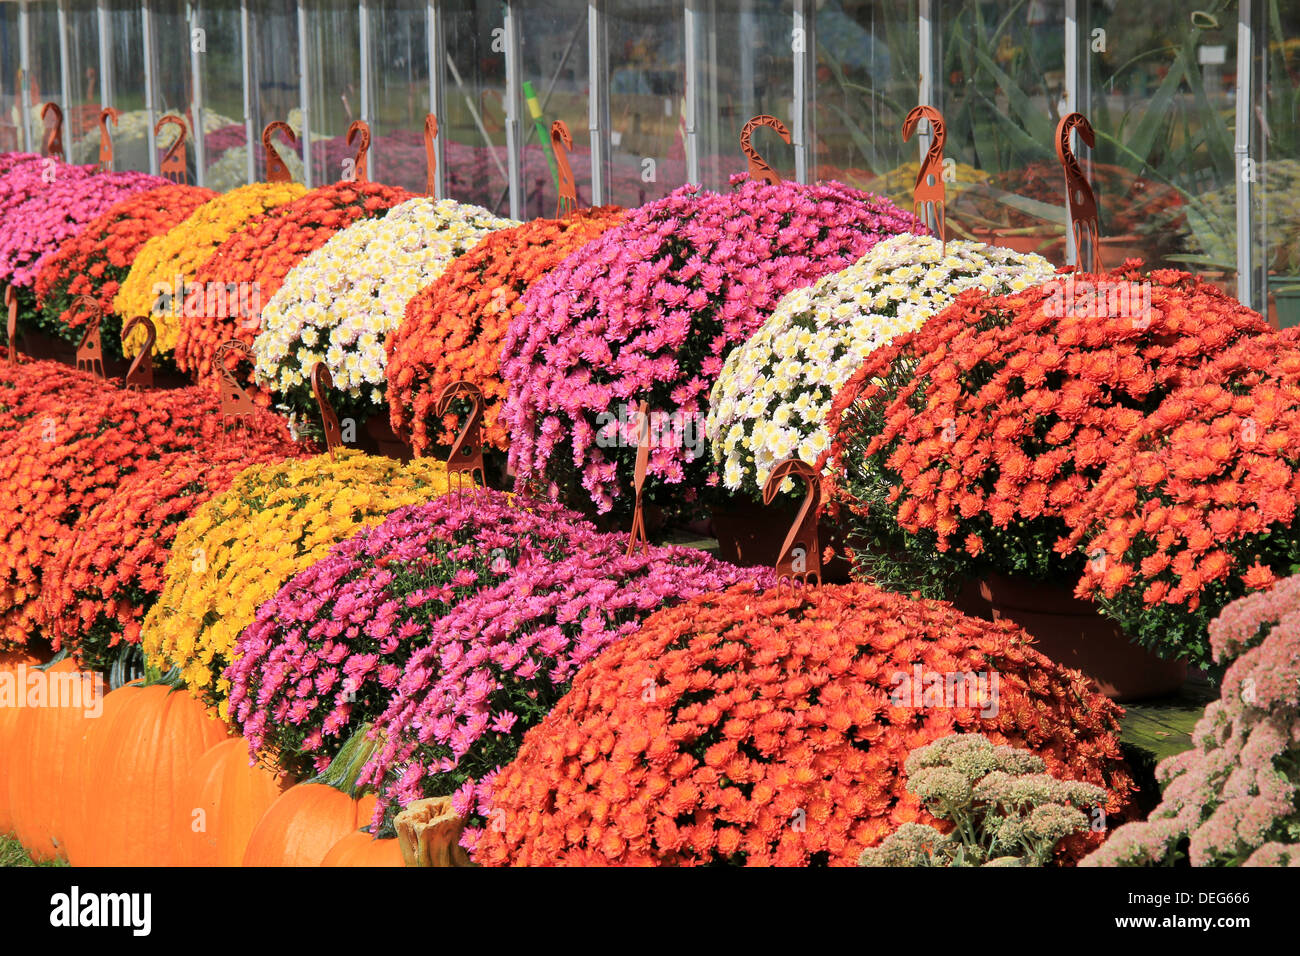 Rows of several lush,colorful hardy mums in hanging planters and clay pots, with big orange pumpkins set outside on benches at local nursery. Stock Photo